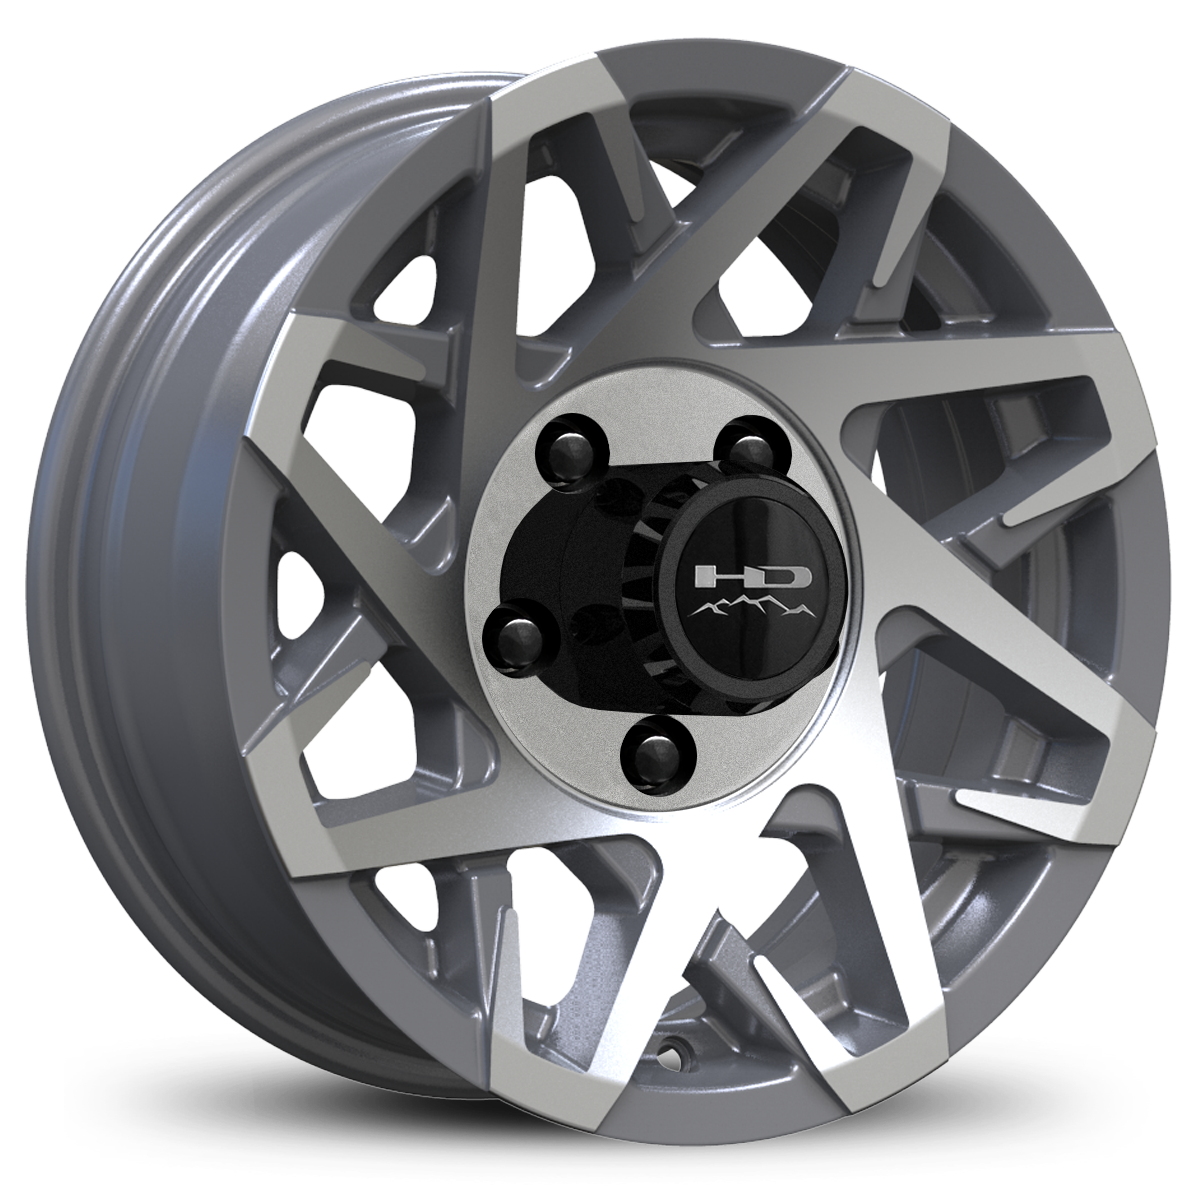 HD Off-Road Canyon Custom Trailer Wheel Rims in 14x5.5 Gloss Gunmetal with Machined Face with Center Cap & Logo fits 5x4.50 / 5x114.3 Axle Boat, Car, RV, Travel, Concession, Horse, Utility, Lawn & Garden, & Landscaping.